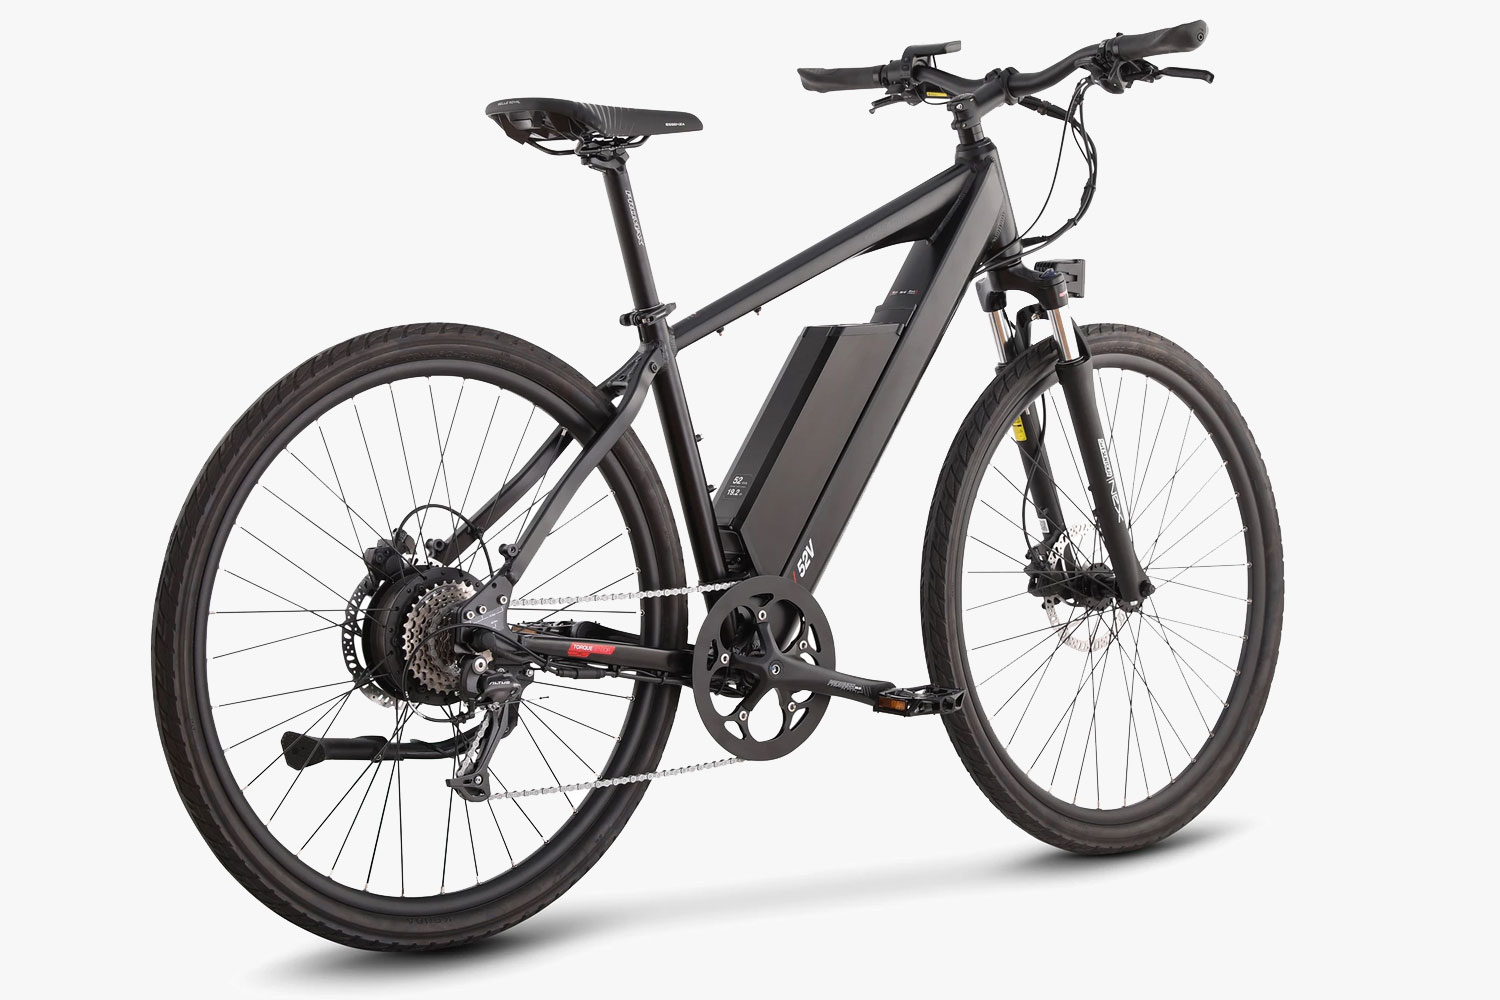 An Electric Bicycle with Unprecedented Range